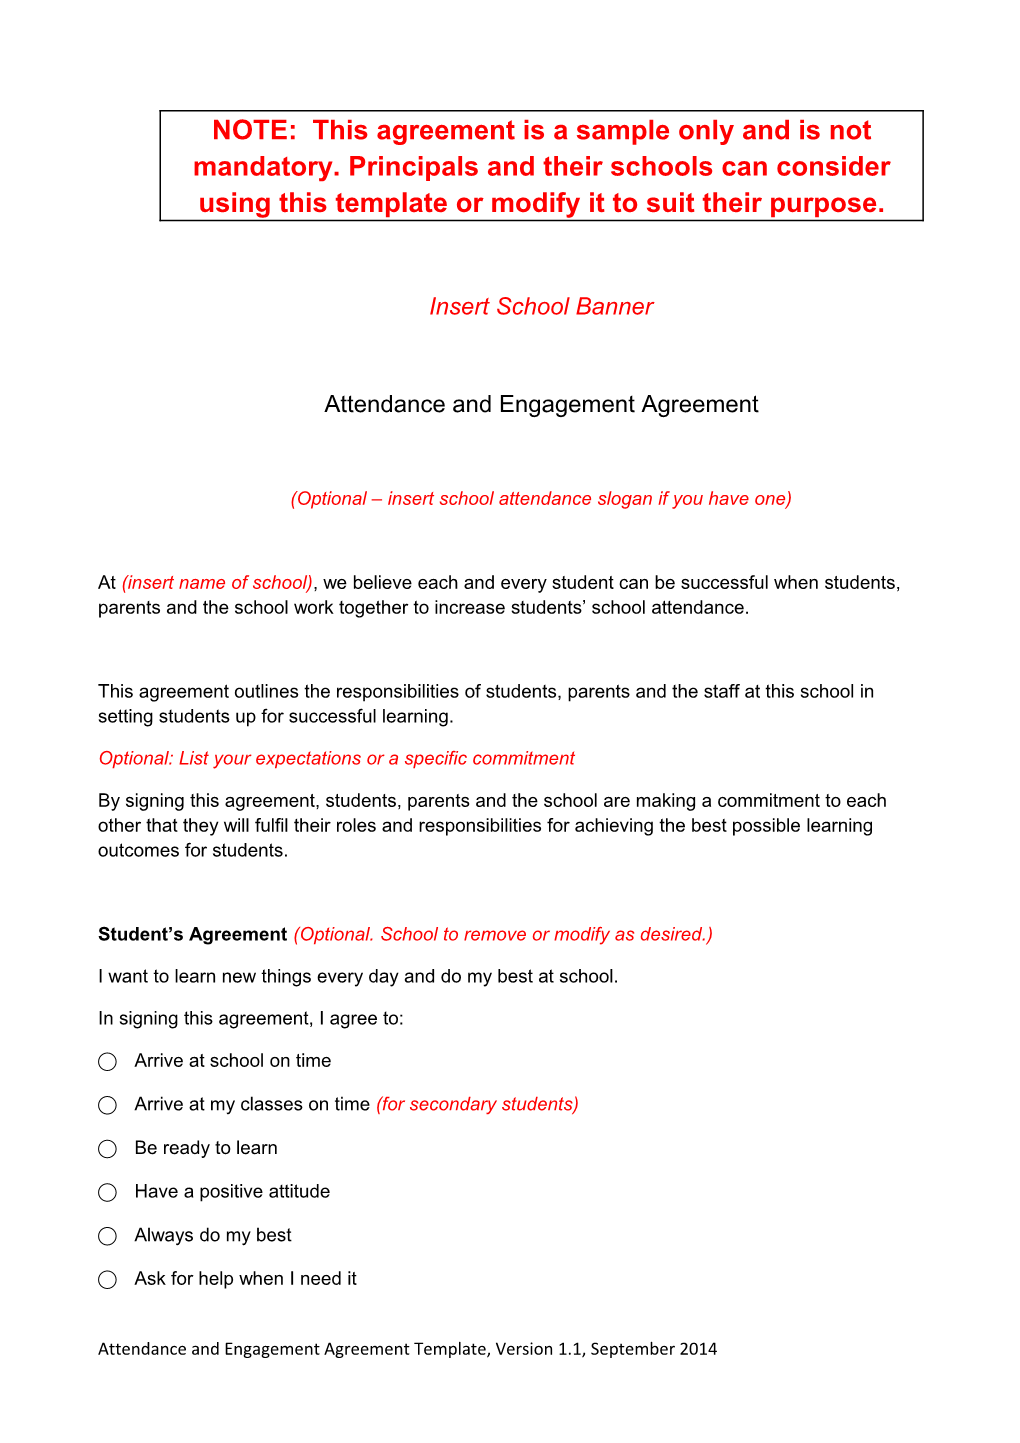 NOTE: This Agreement Is a Sample Only and Is Not Mandatory. Principals and Their Schools